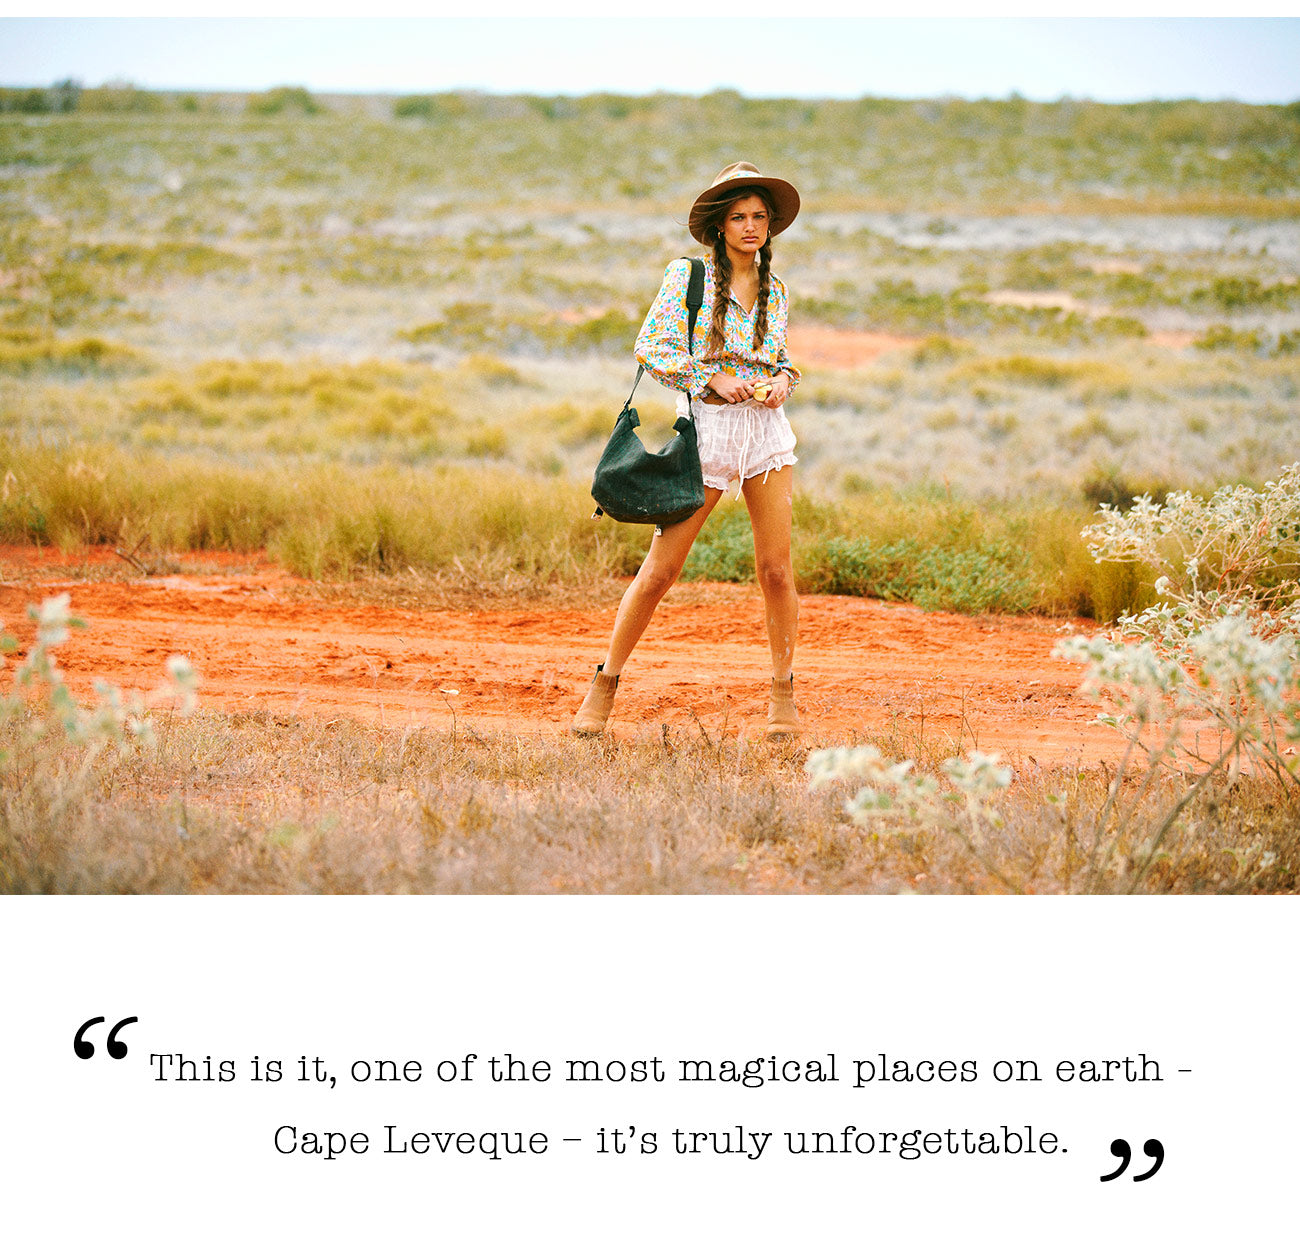 Behind the scenes pics from Arnhem family travel adventure to Cape Leveque WA